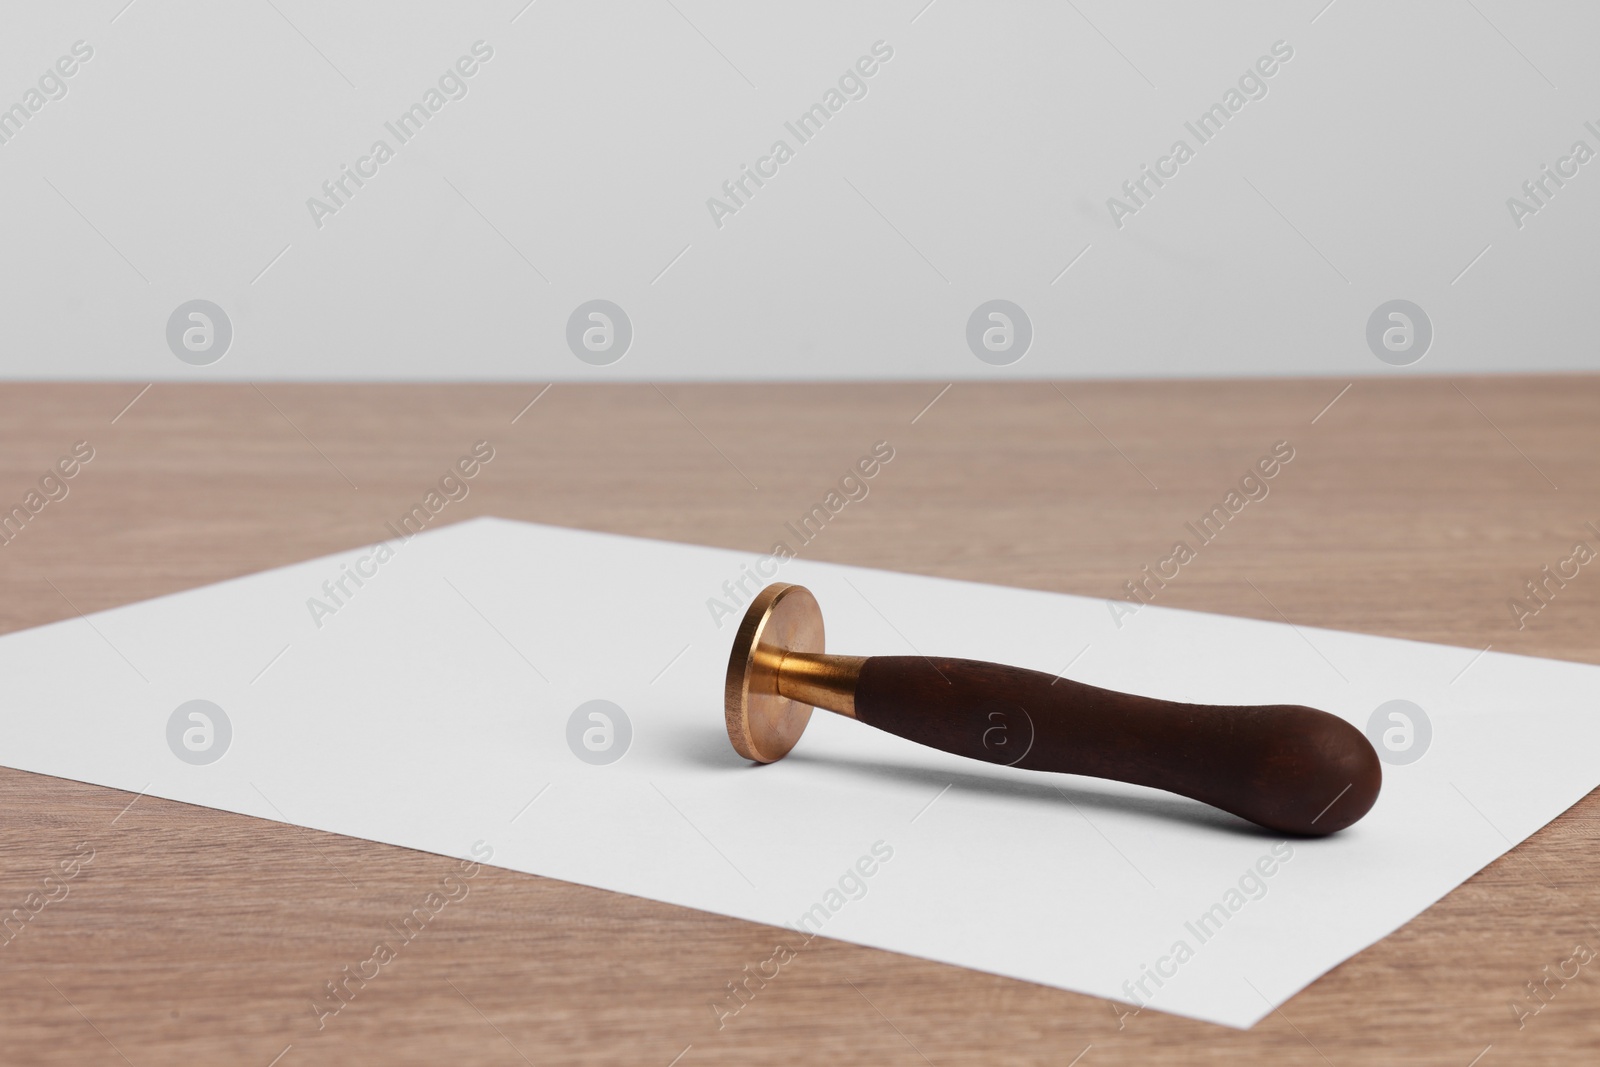 Photo of One stamp tool and sheet of paper on wooden table